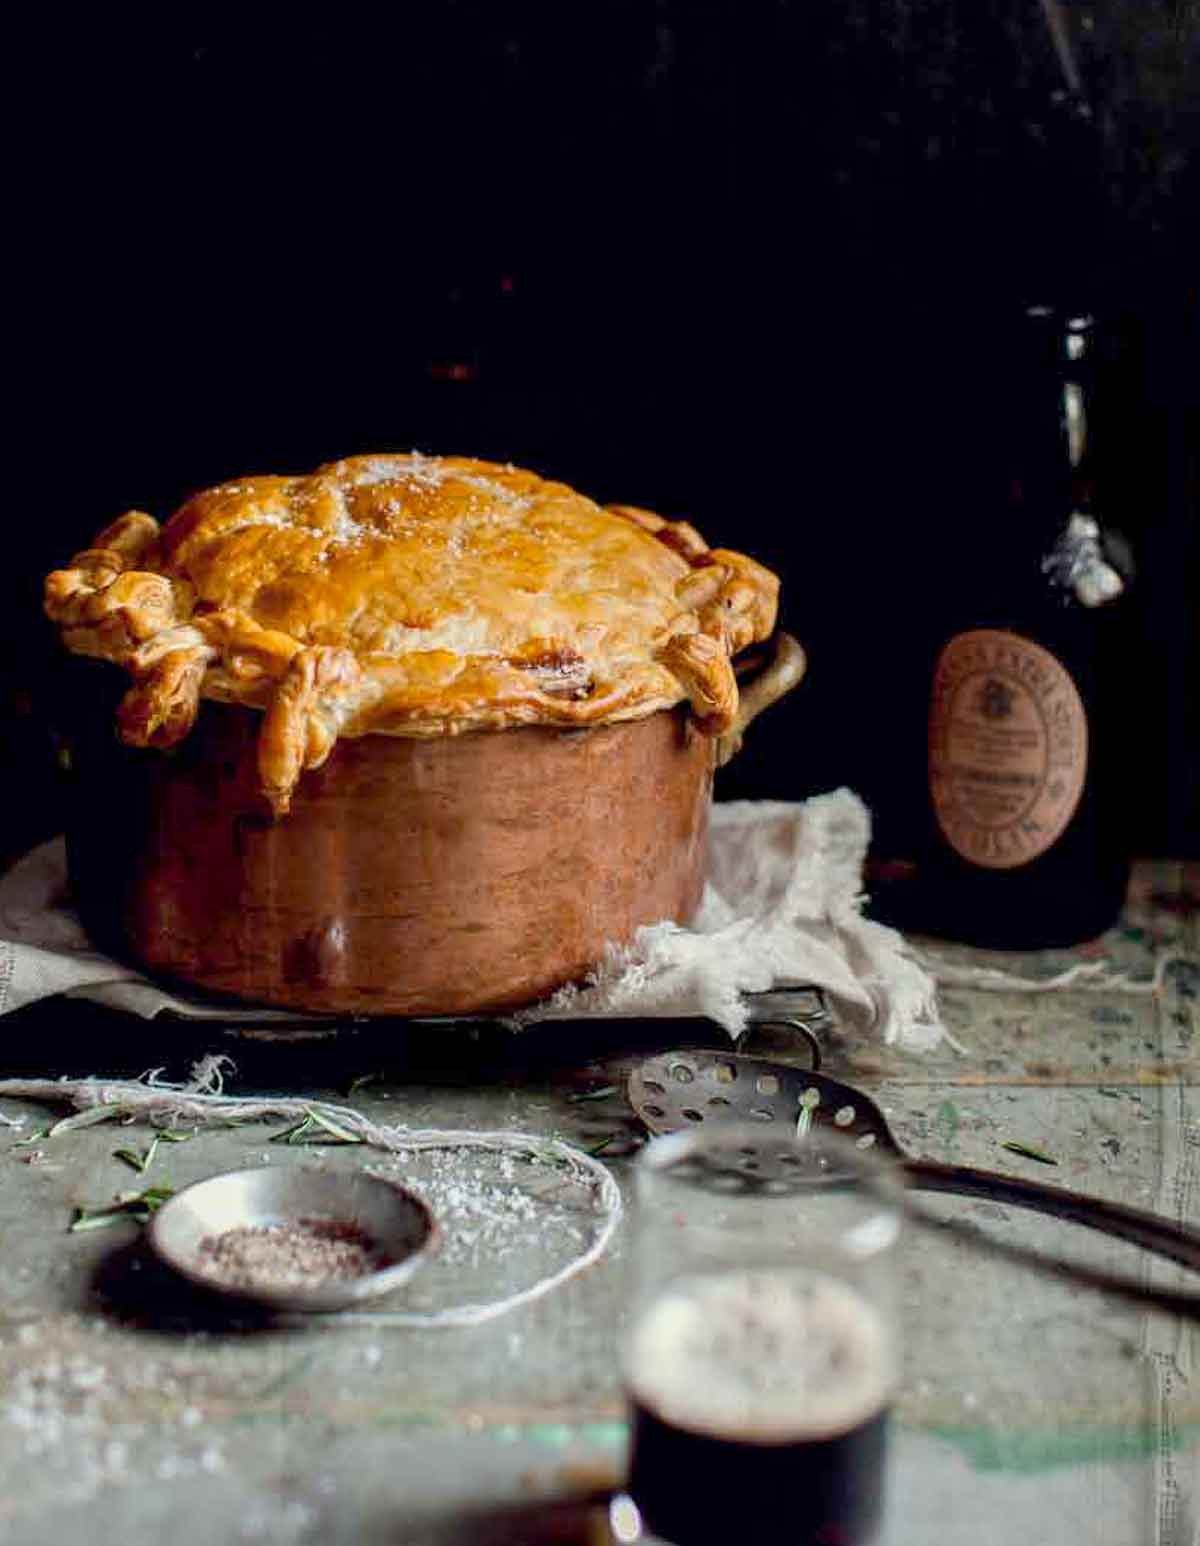 A copper pot filled with beef and Guinness cake with puff pastry on a towel on a grill with a bottle behind.